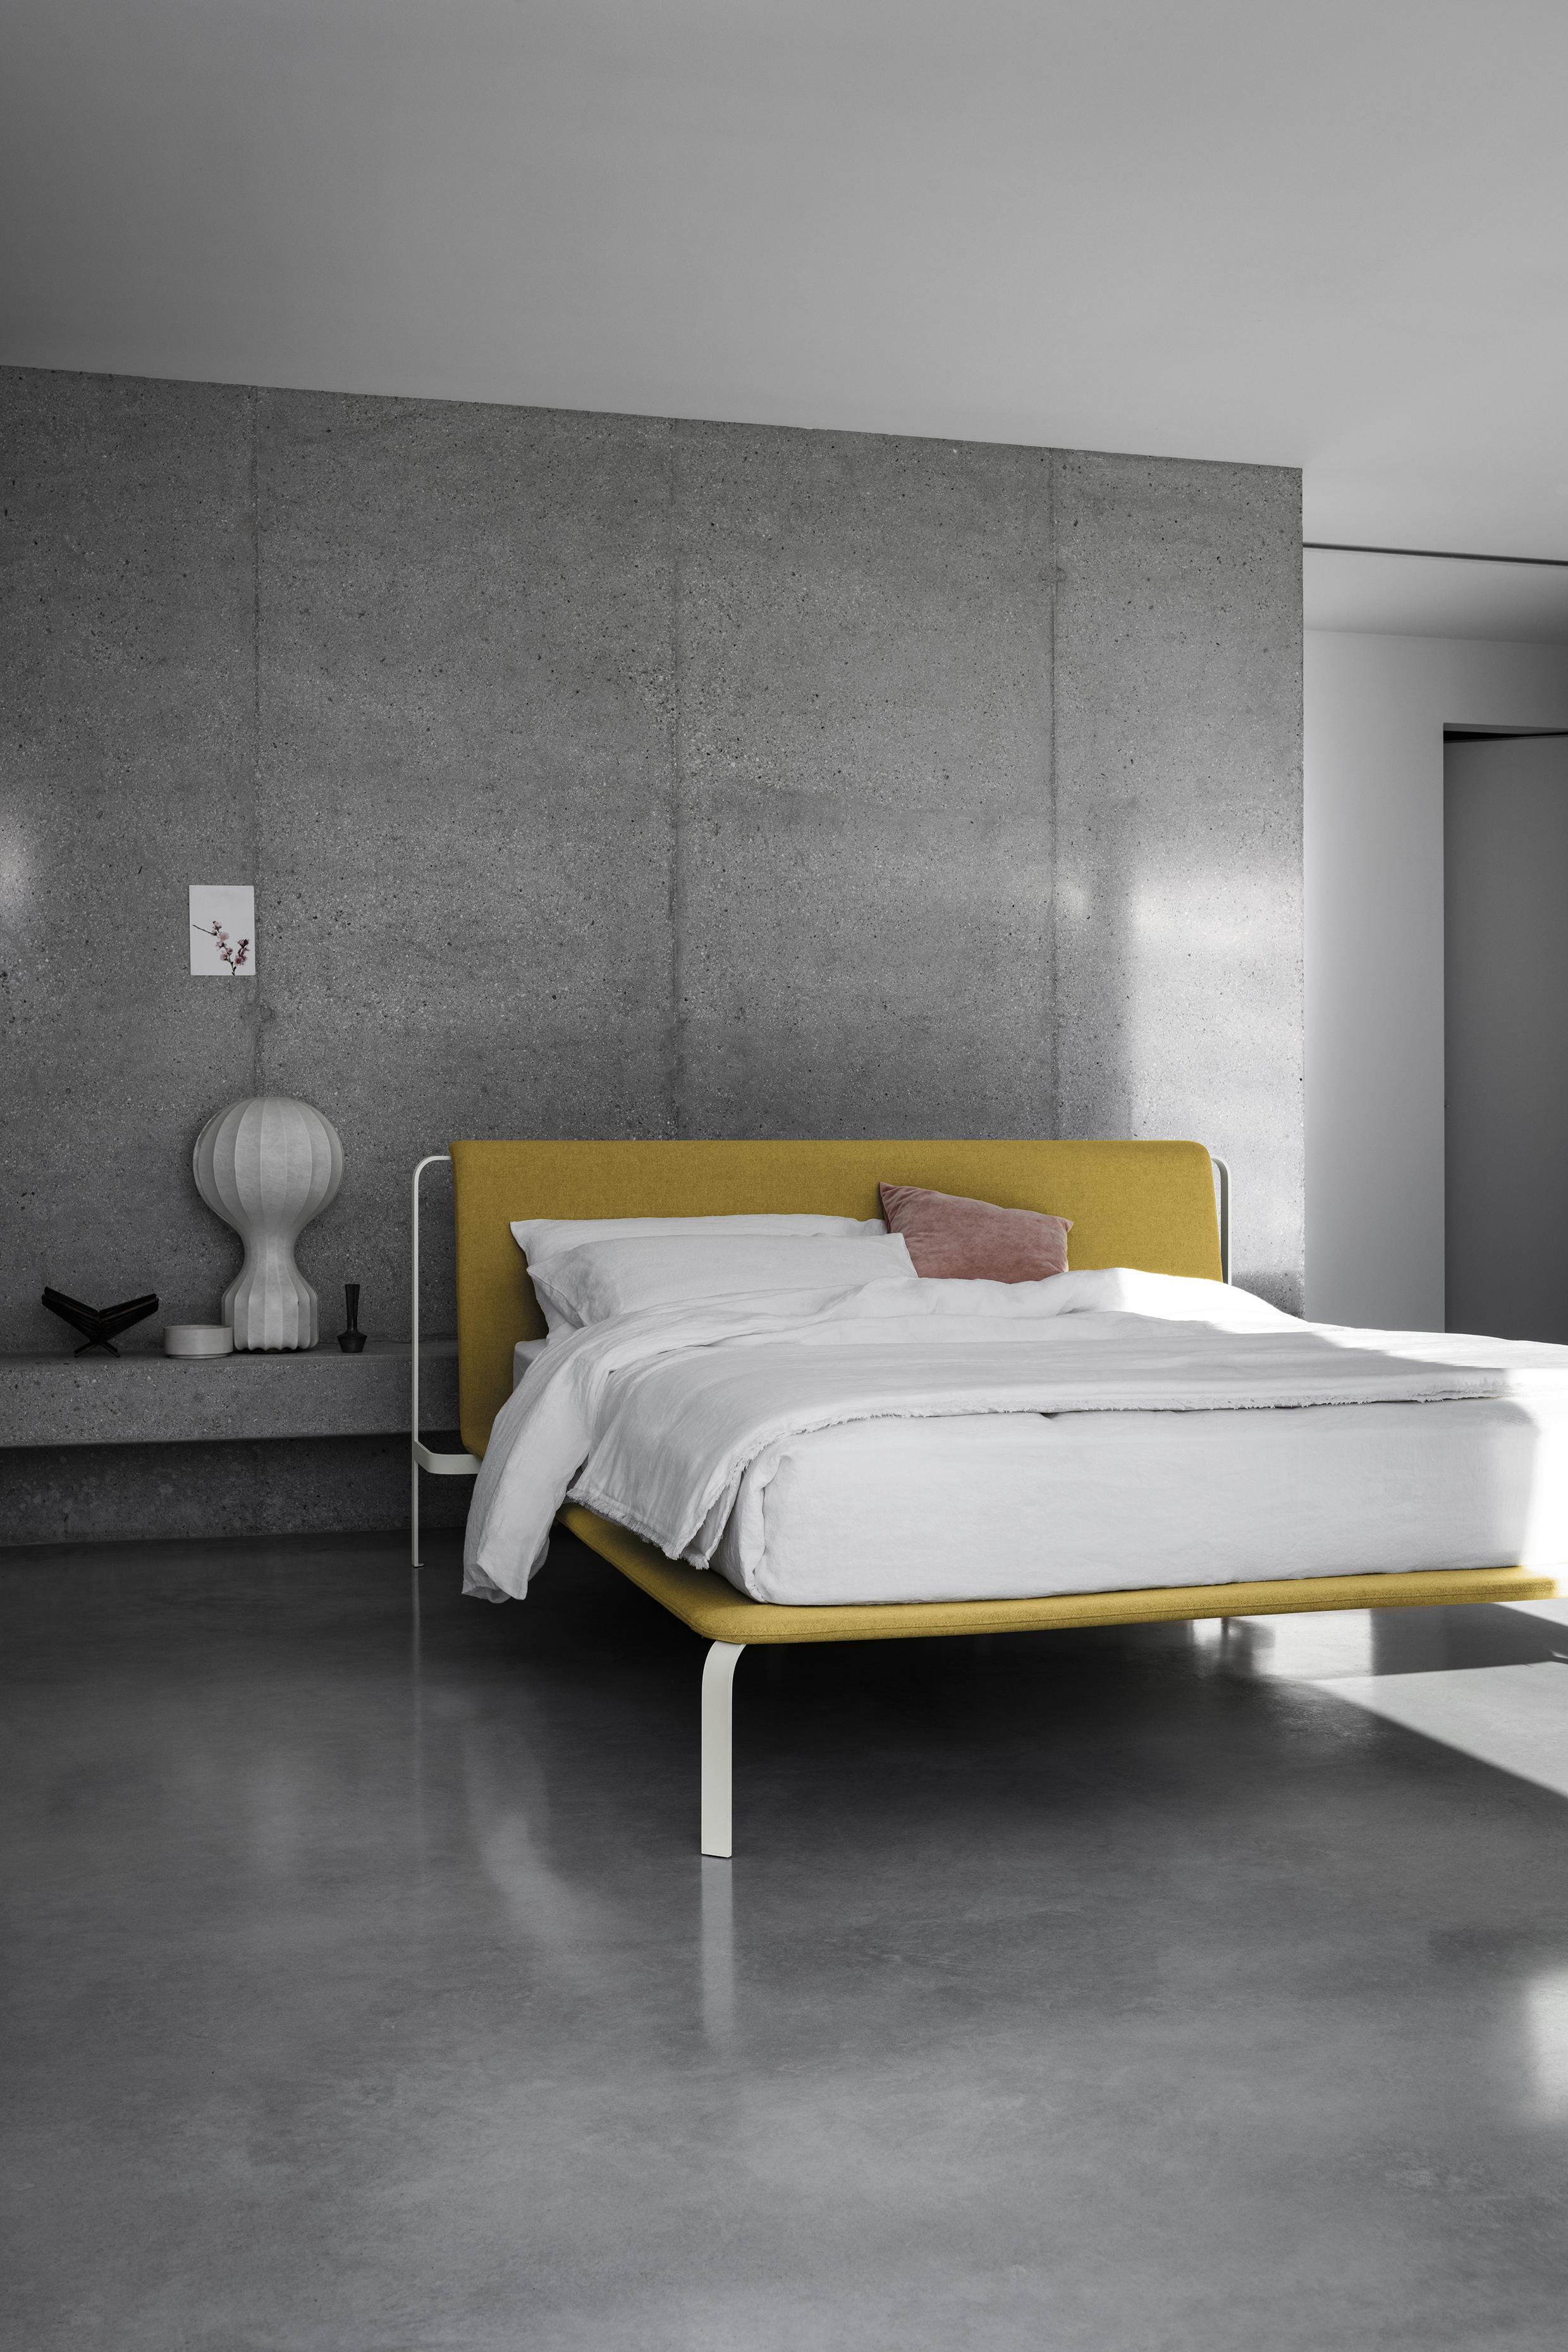 Minimalist without renouncing to the comfort, Bend bed is composed by a thin structure supporting a curved plan. The light padding, covered with fabric, creates a light and pleasant feeling. Cover is proposed in various tonalities in order to